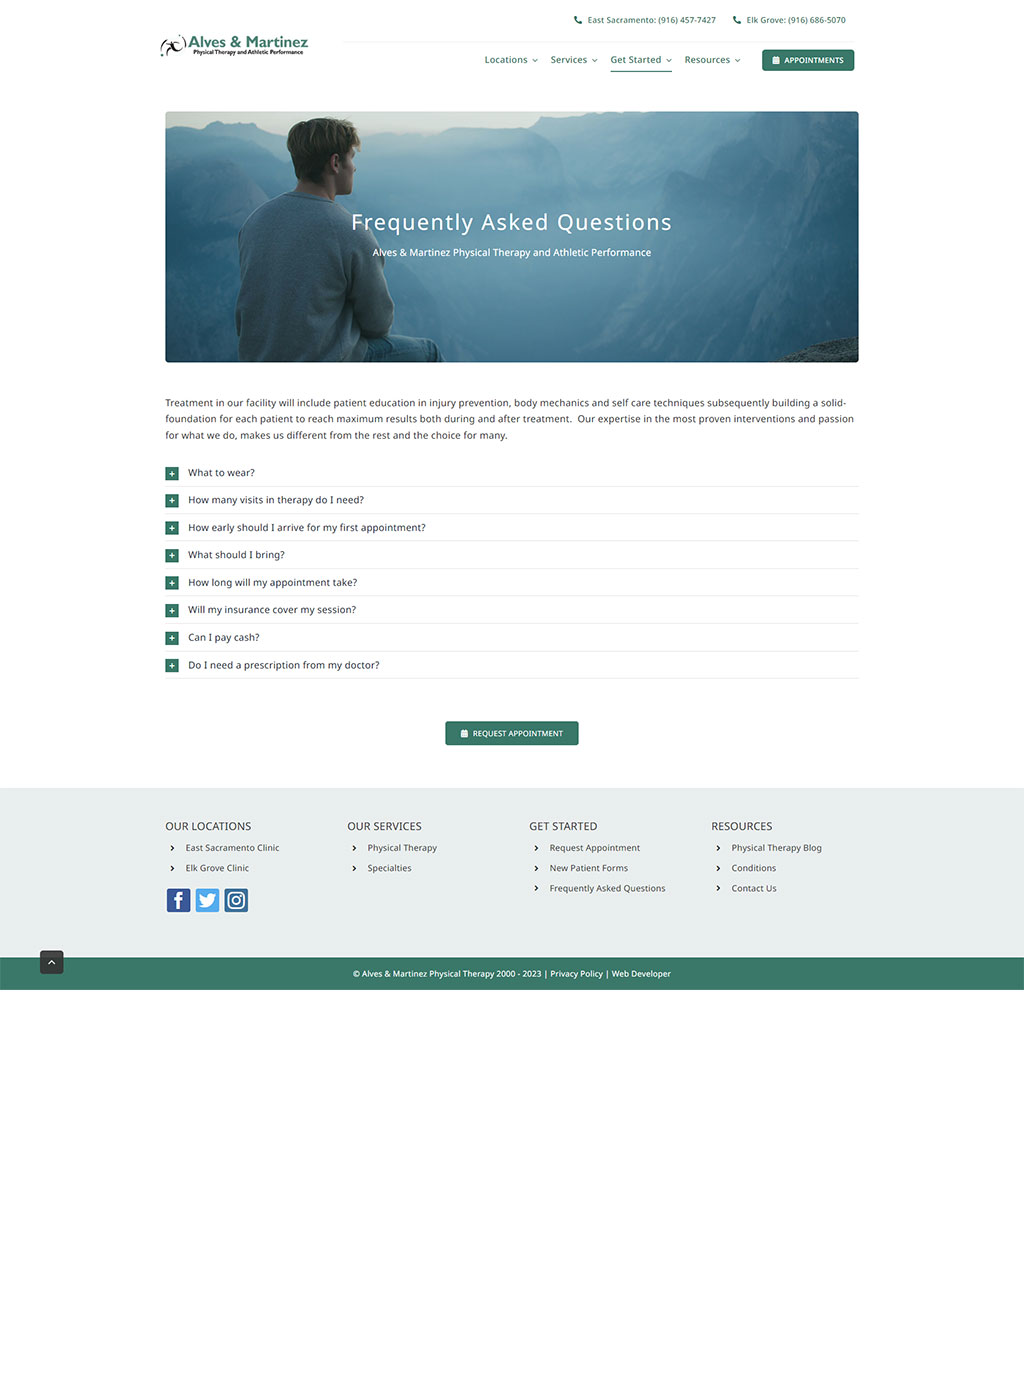 Website developed for Alves & Martinez Physical Therapy